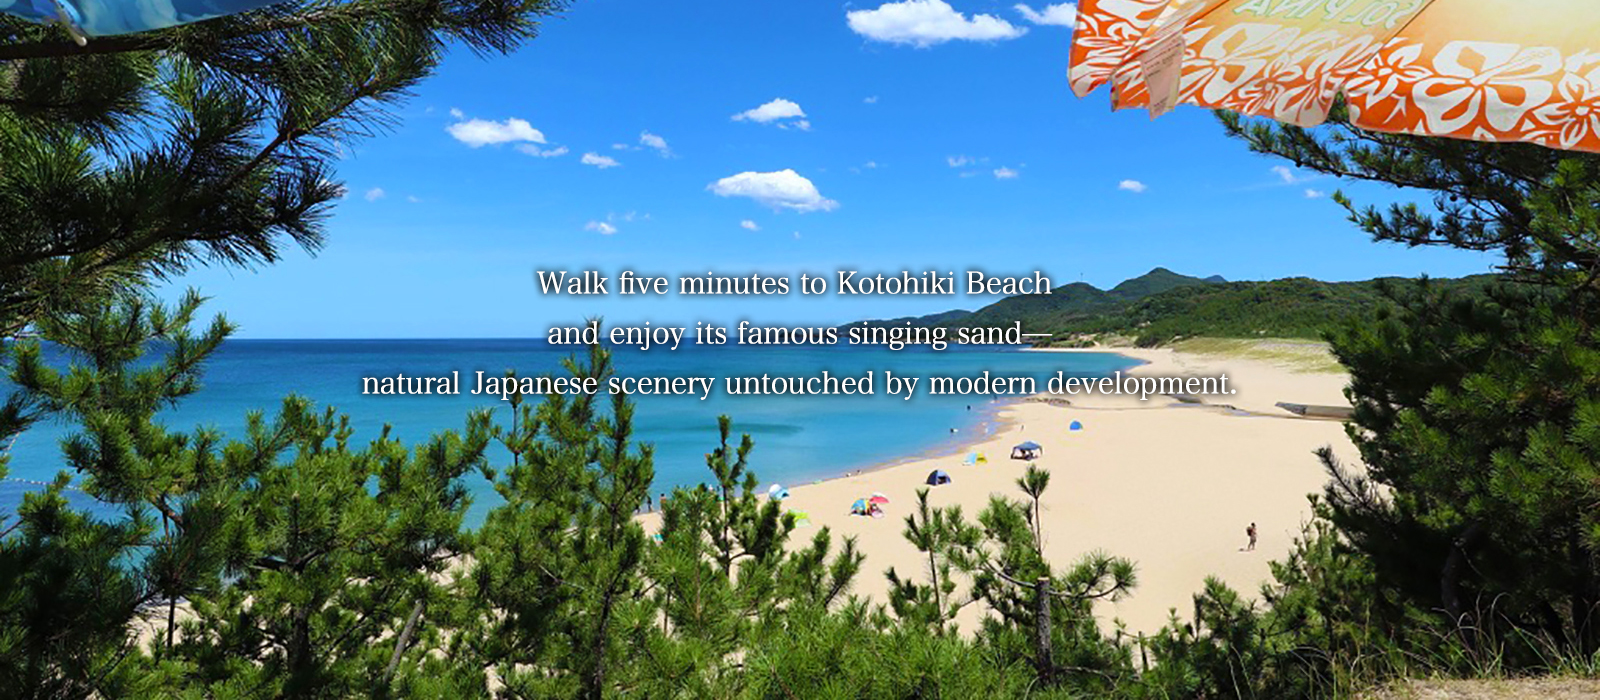 Walk five minutes to Kotohiki Beach and enjoy its famous singing sand—natural Japanese scenery untouched by modern development.